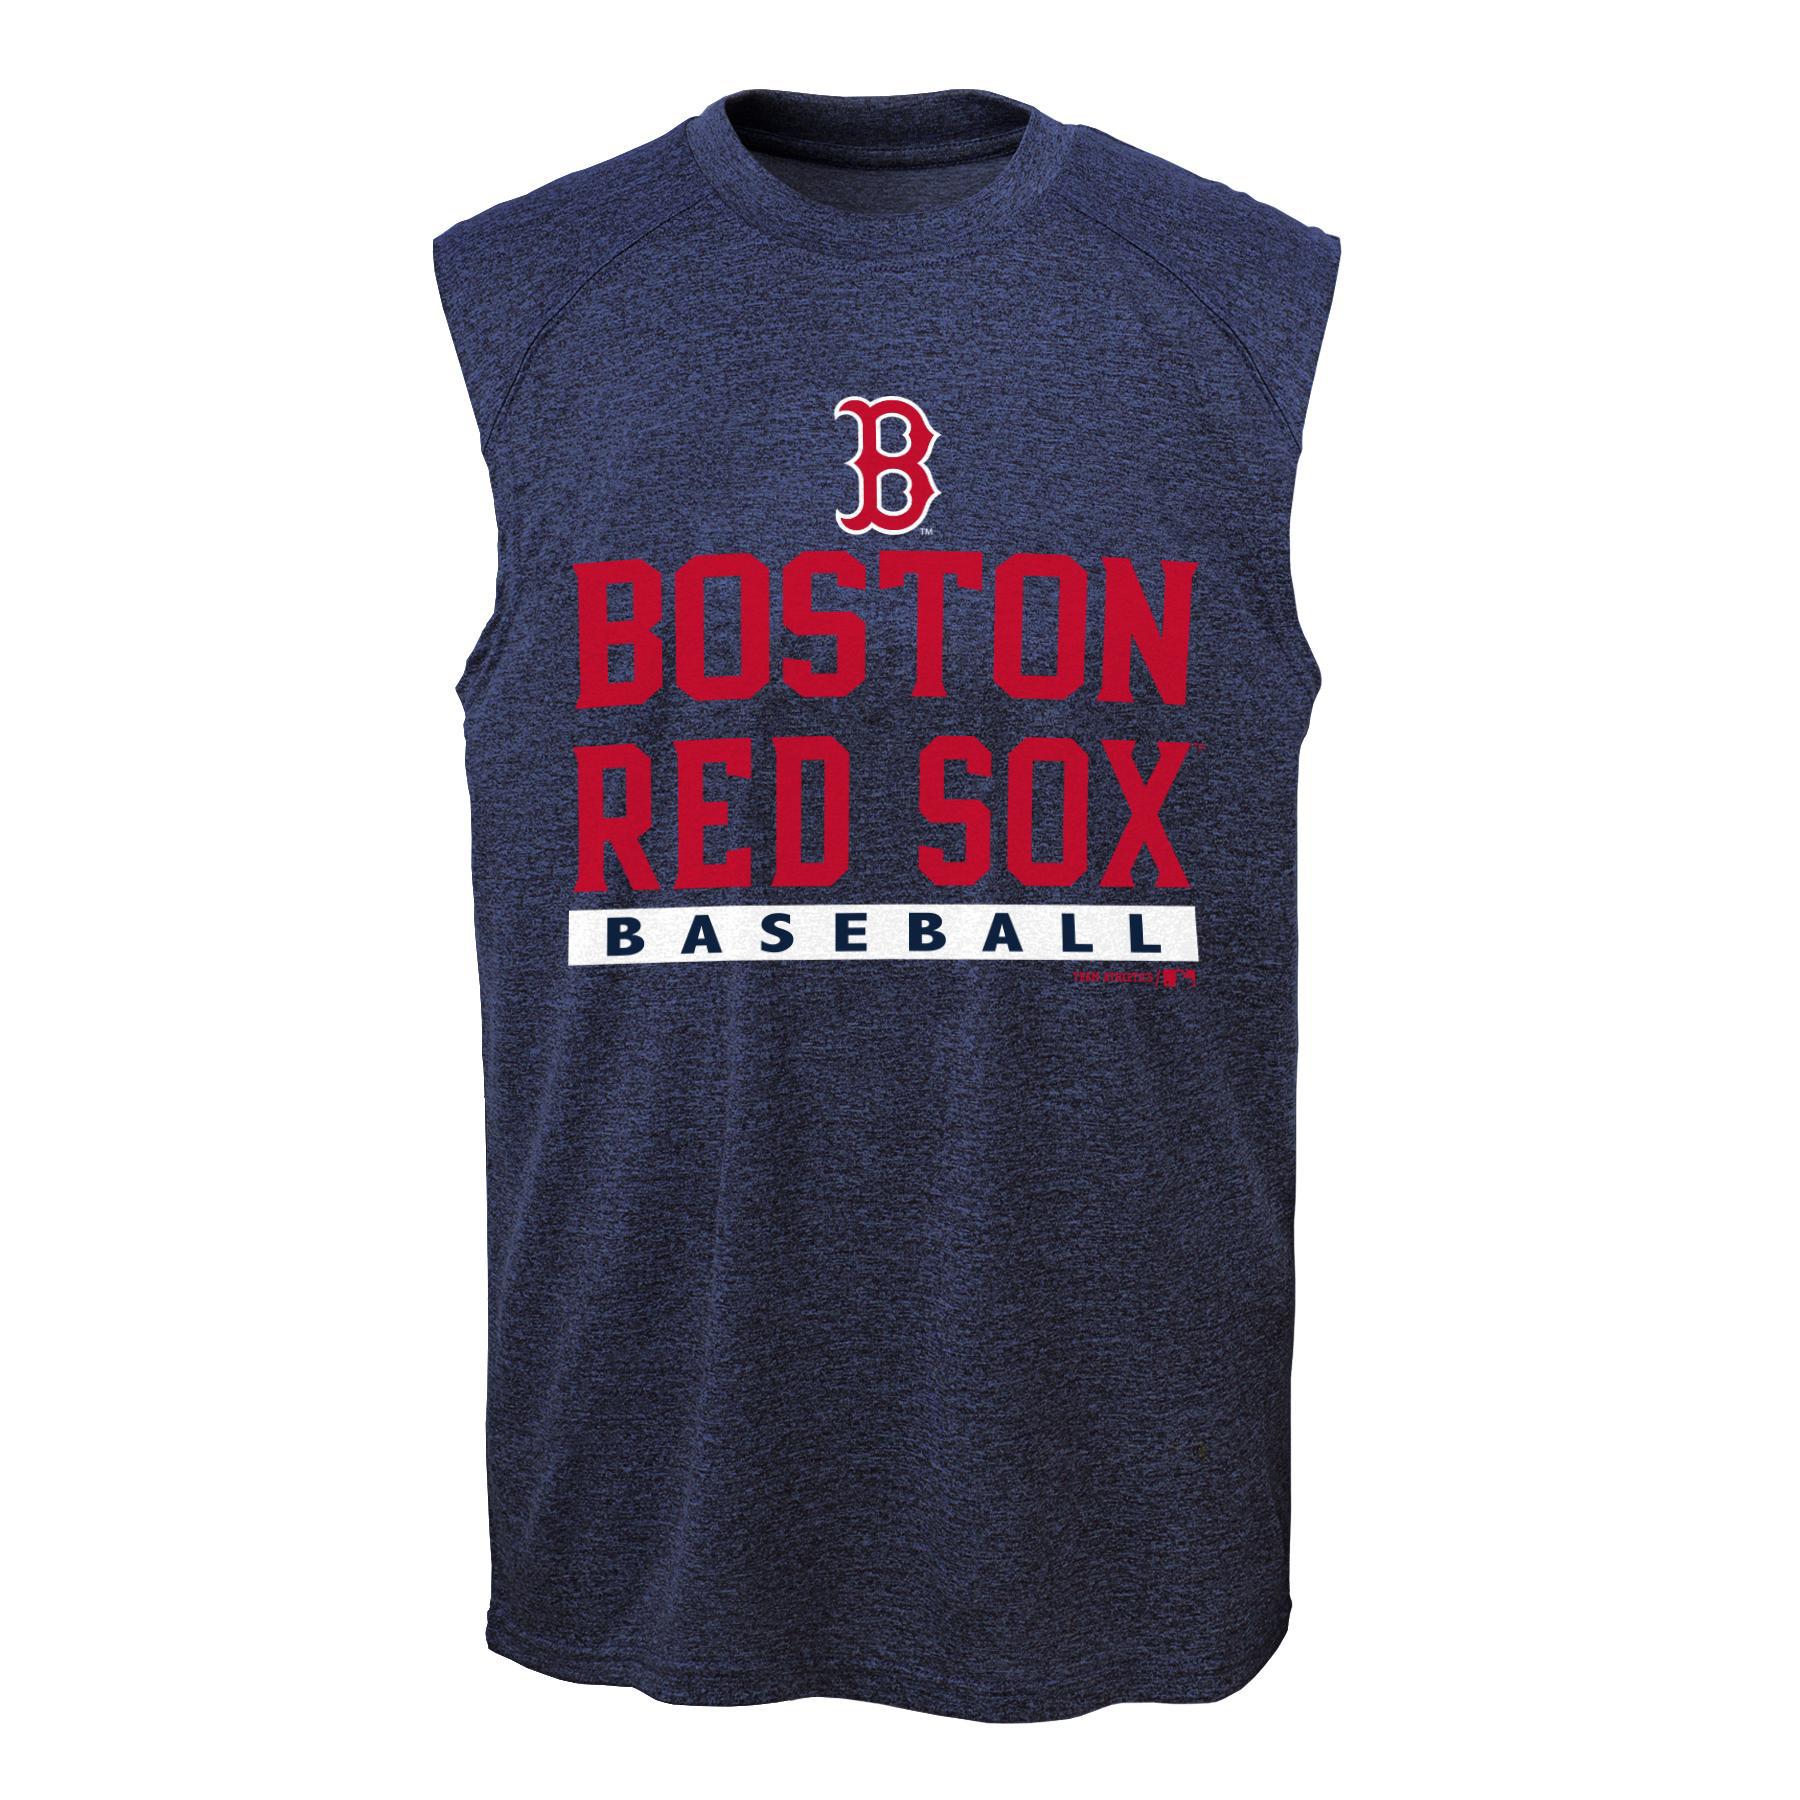 MLB Boy's Graphic Muscle Shirt - Boston Red Sox